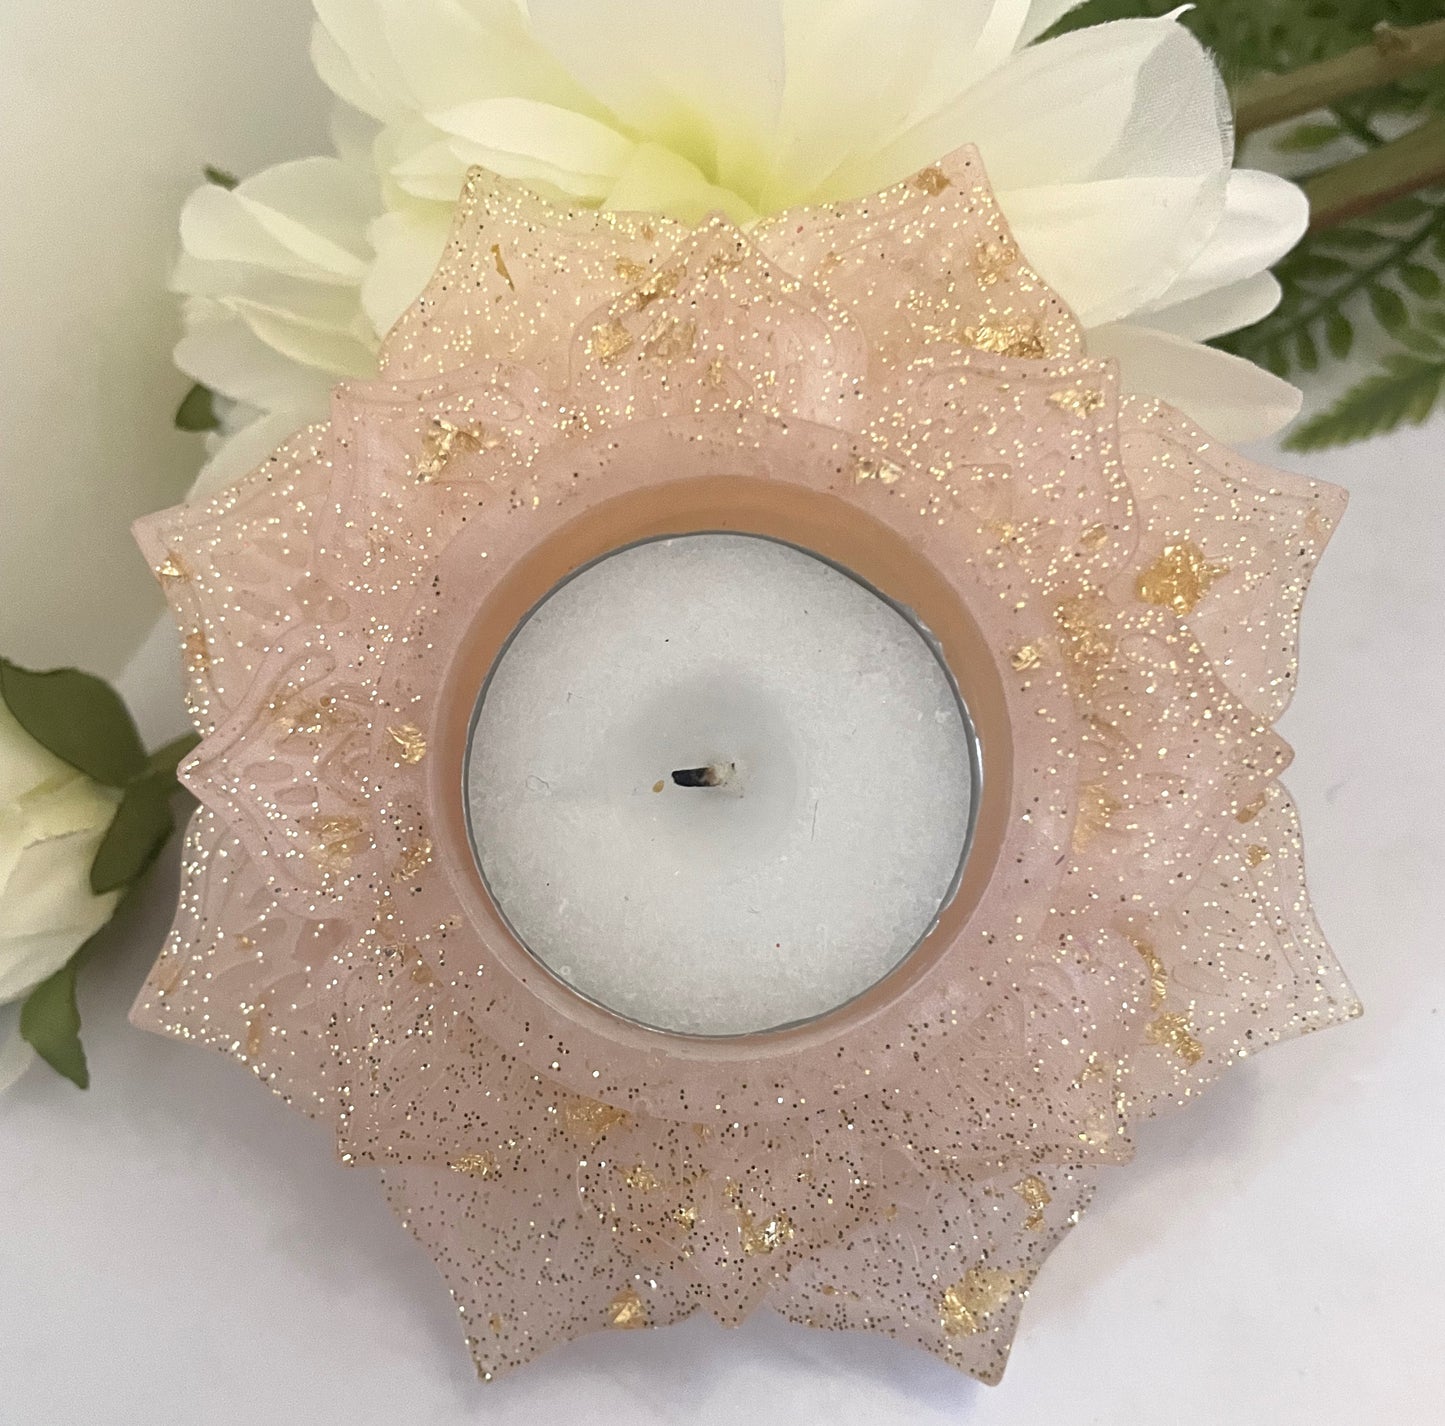 Candle- Lotus Shaped Pink and Gold Foil Leaf